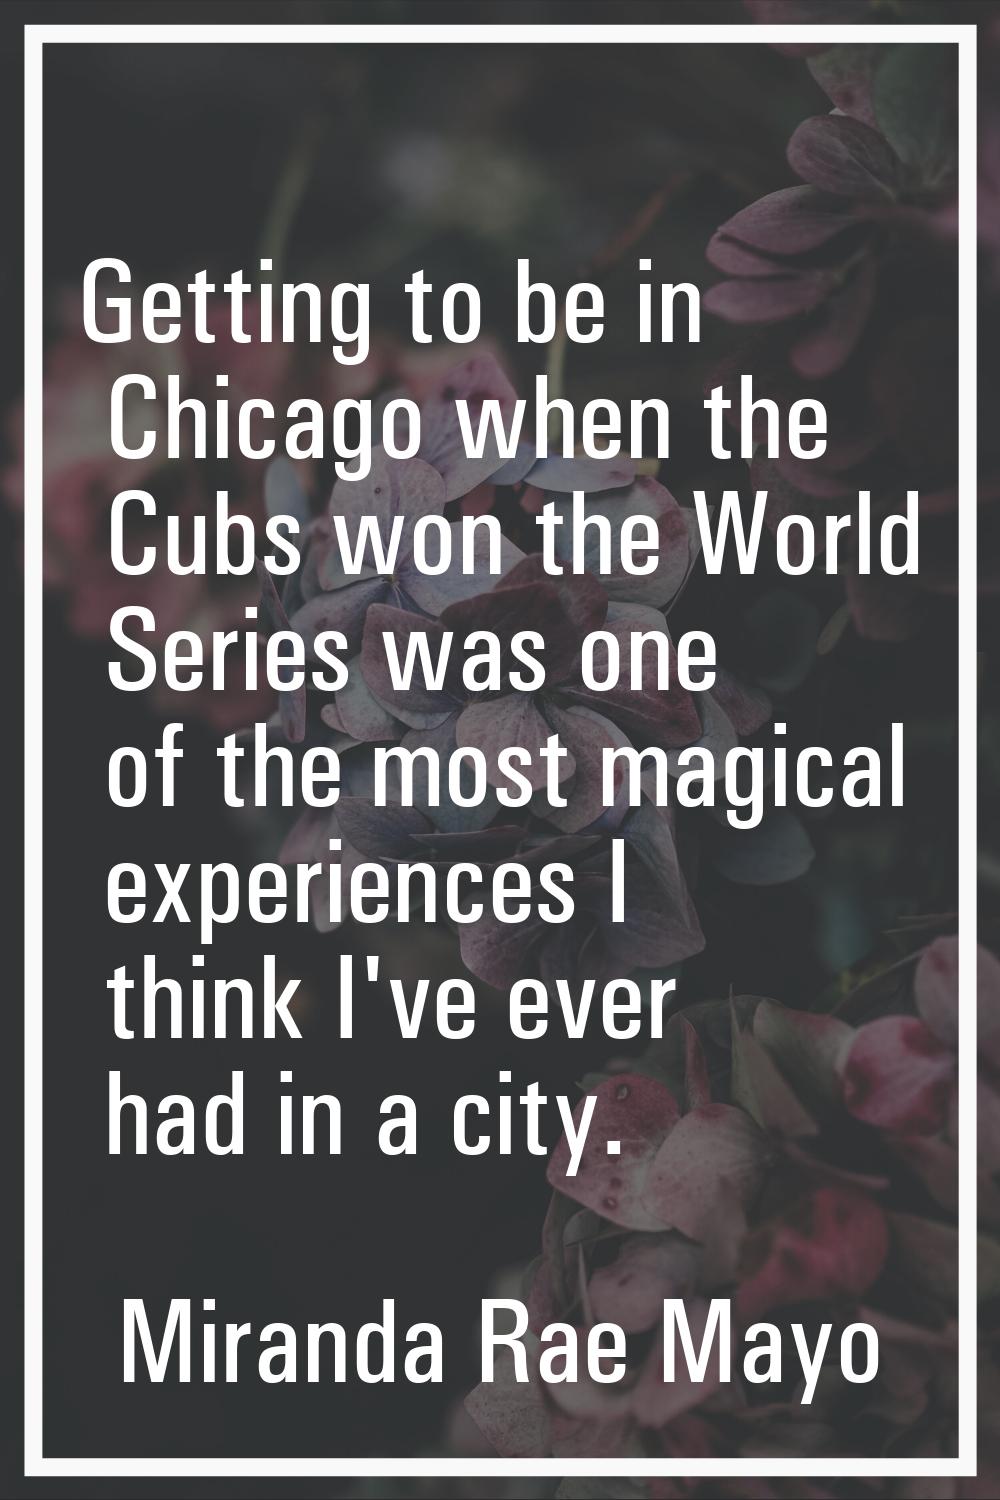 Getting to be in Chicago when the Cubs won the World Series was one of the most magical experiences